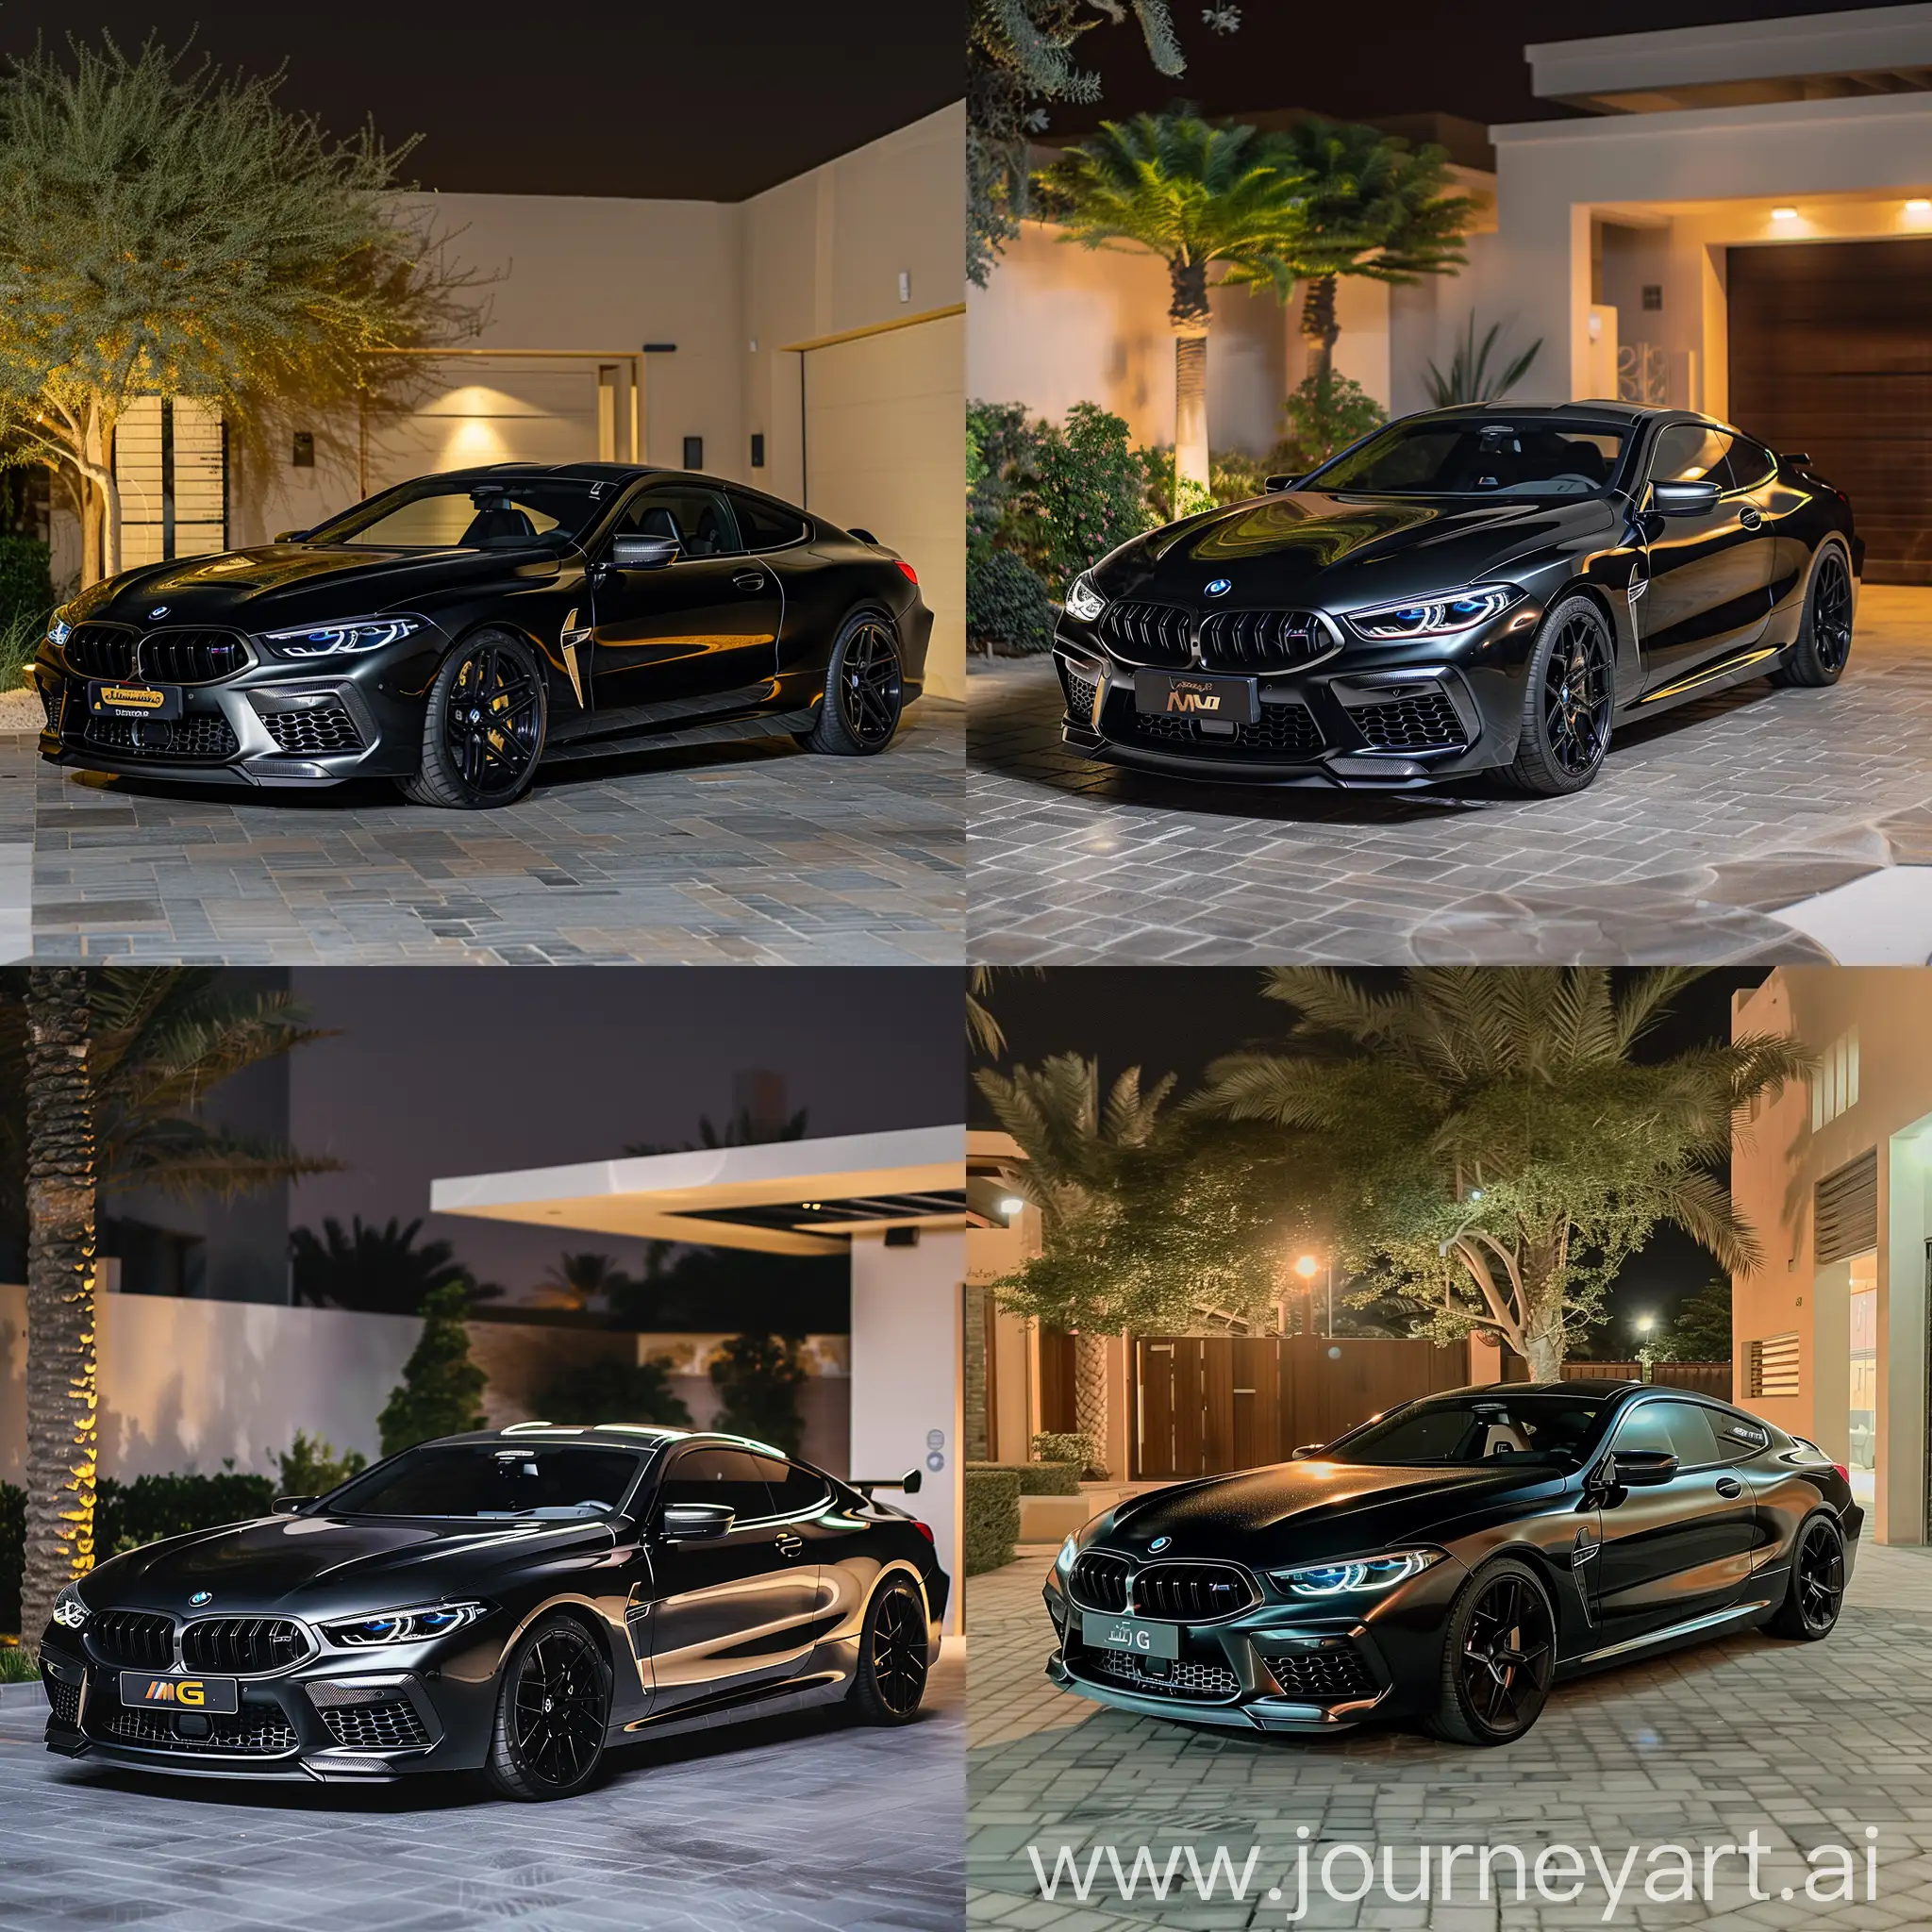 Realistic vision a black bmw m8 g power kit parked in Dubai in garage summer vibes night